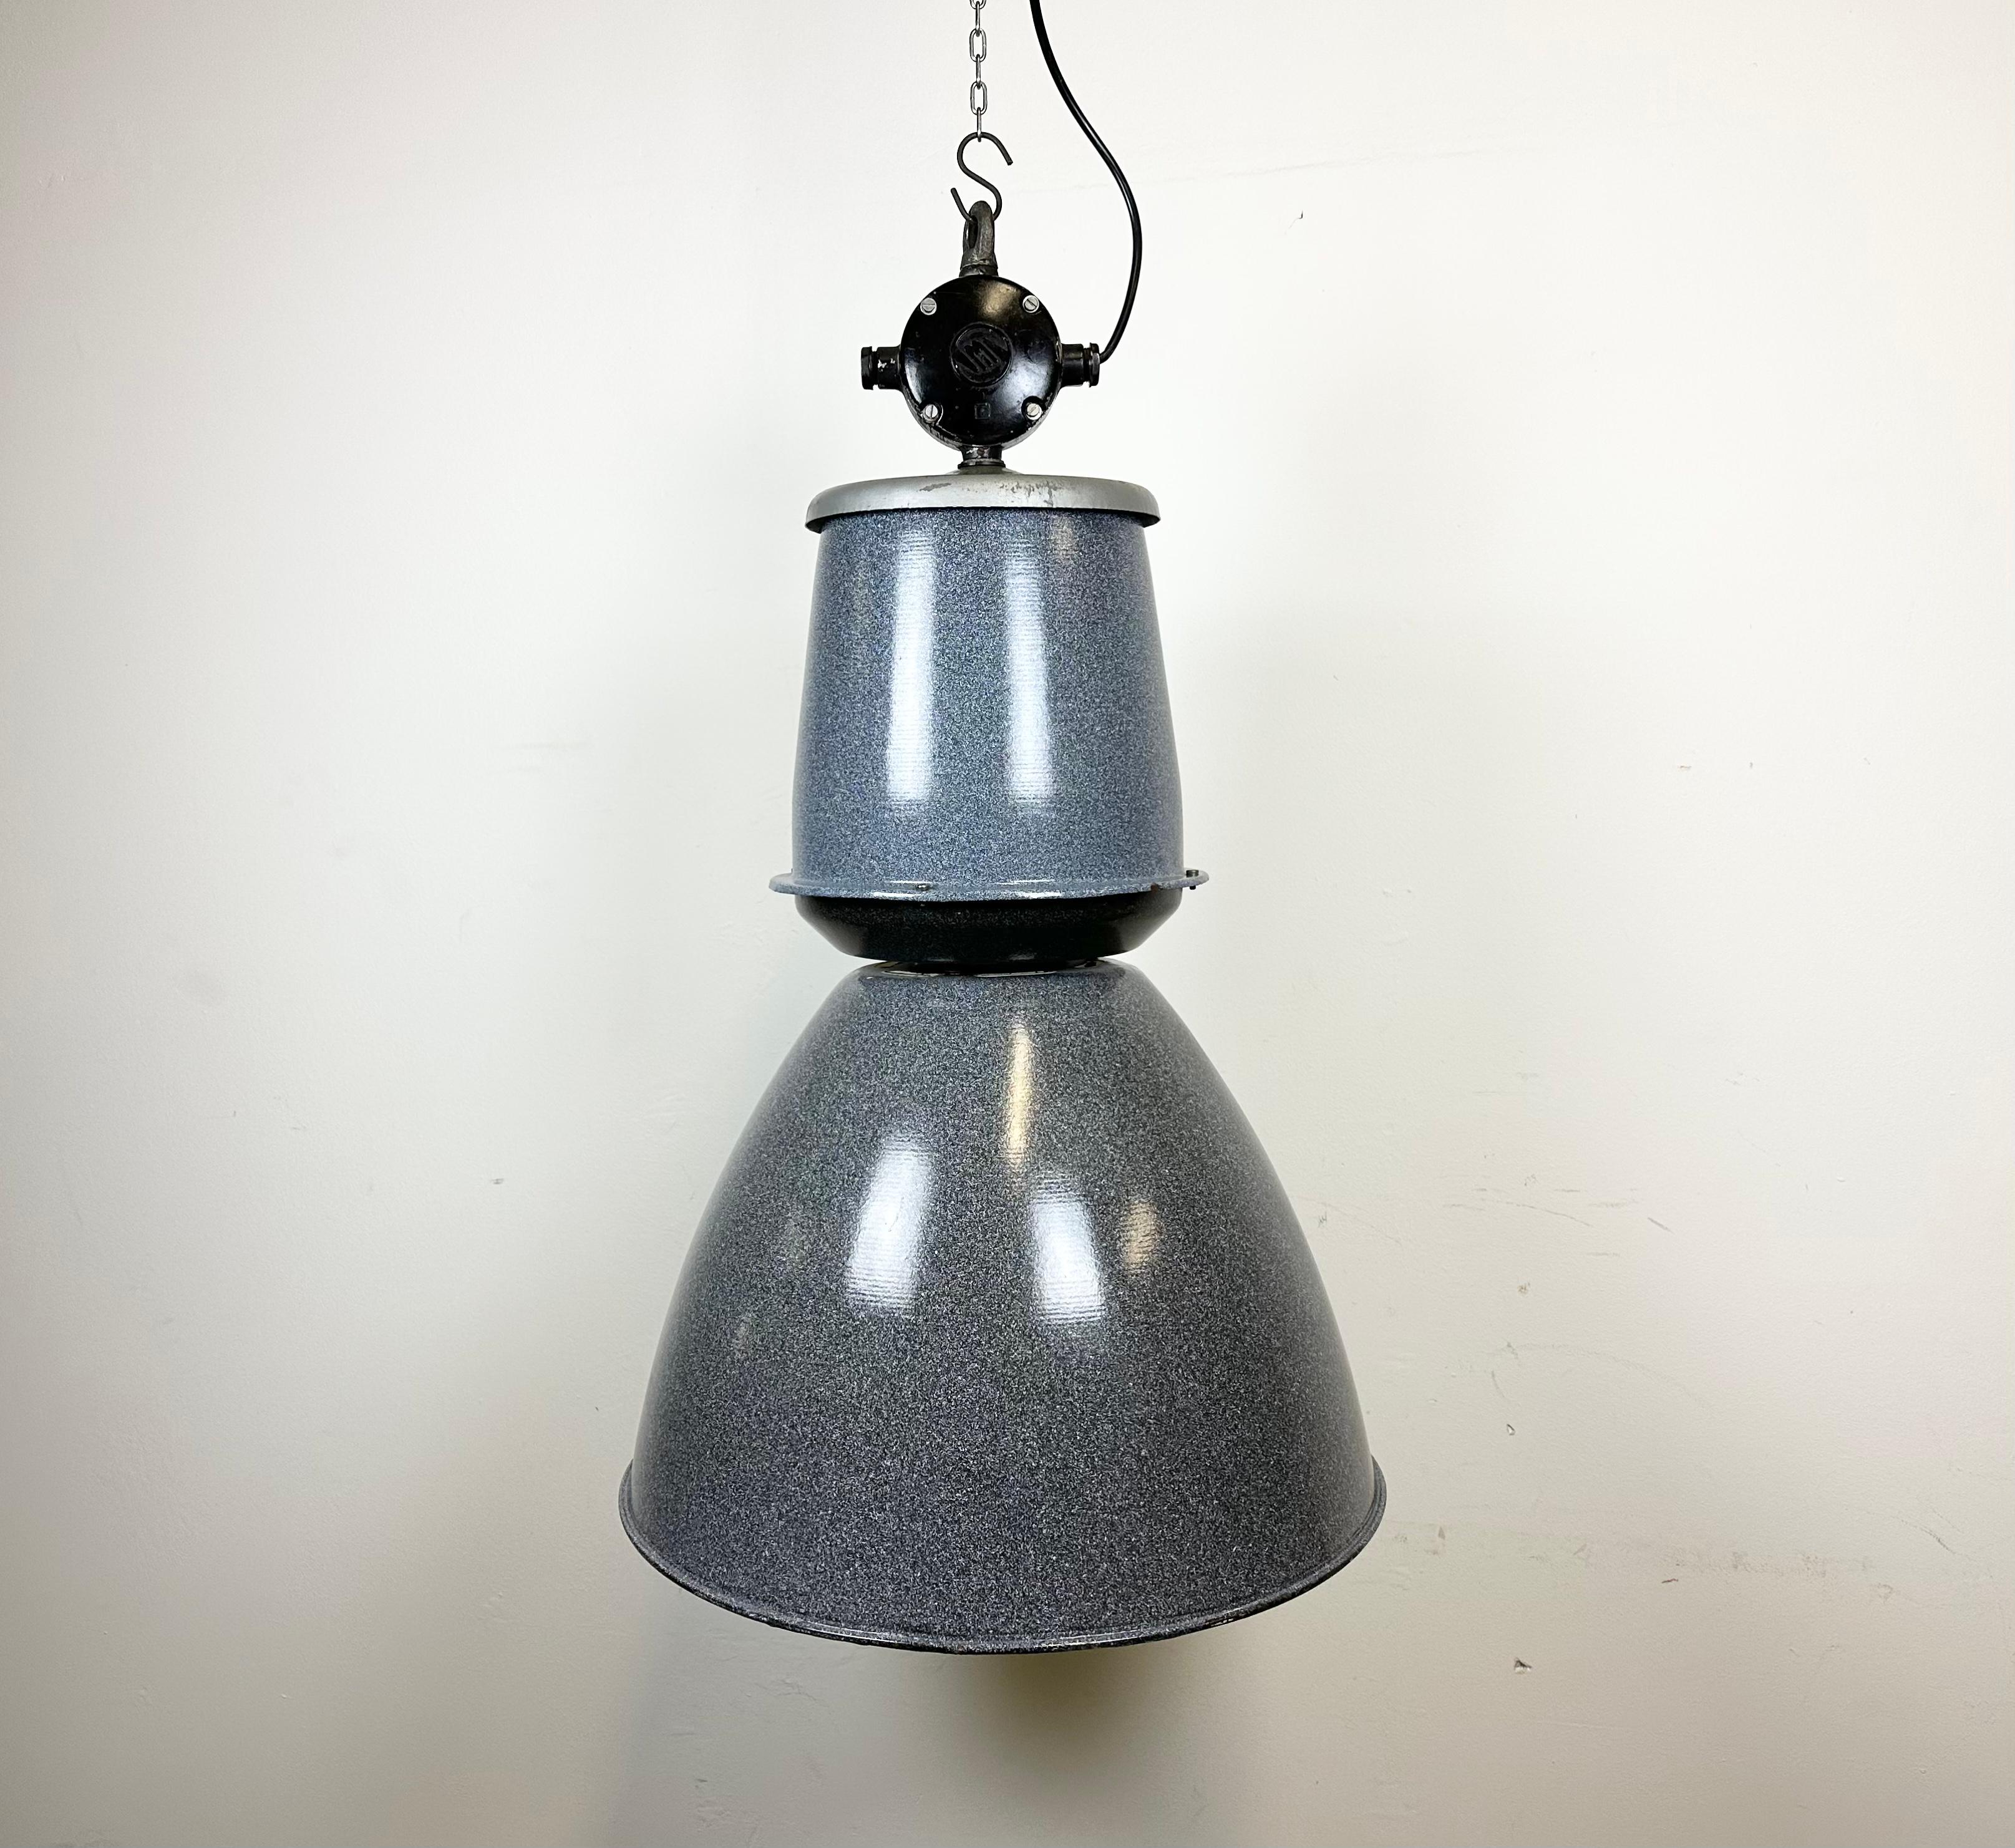 This grey industrial pendant light was designed in the 1960s and produced by Elektrosvit in former Czechoslovakia. It features a cast aluminium top, a grey enamel exterior and a white enamel interior.
New porcelain socket requires E 27 / E 26